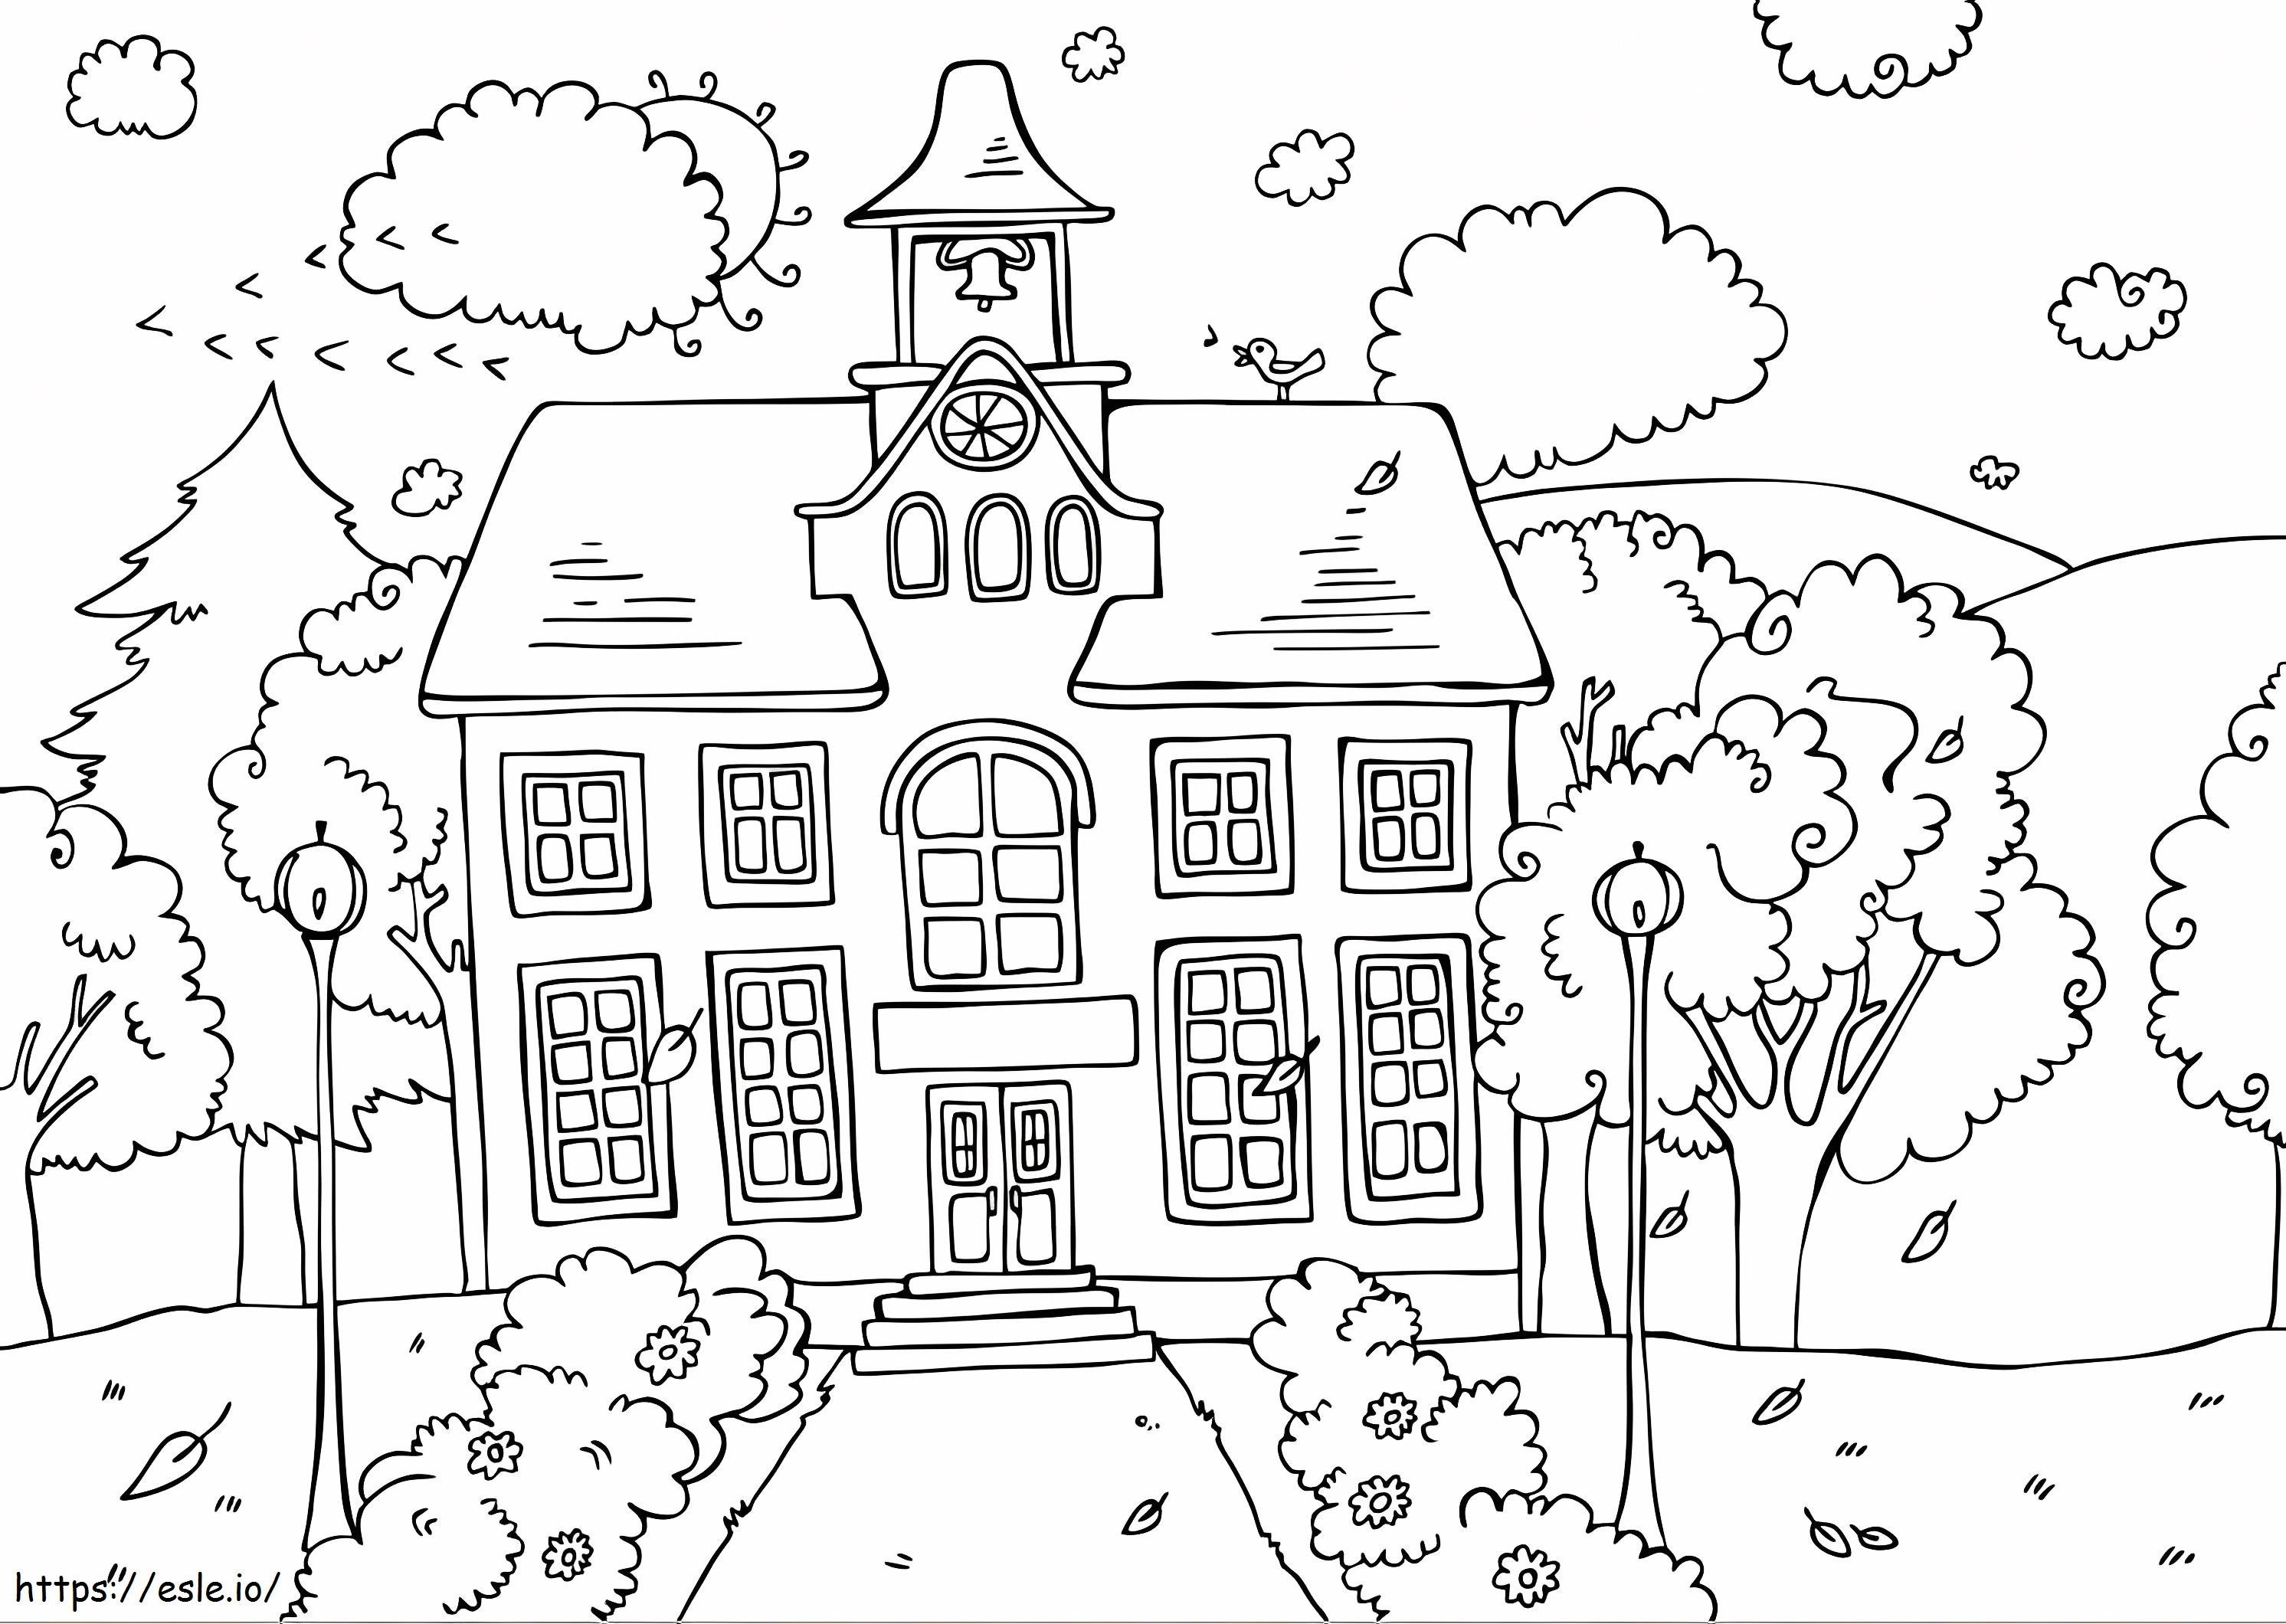 Awesome School coloring page